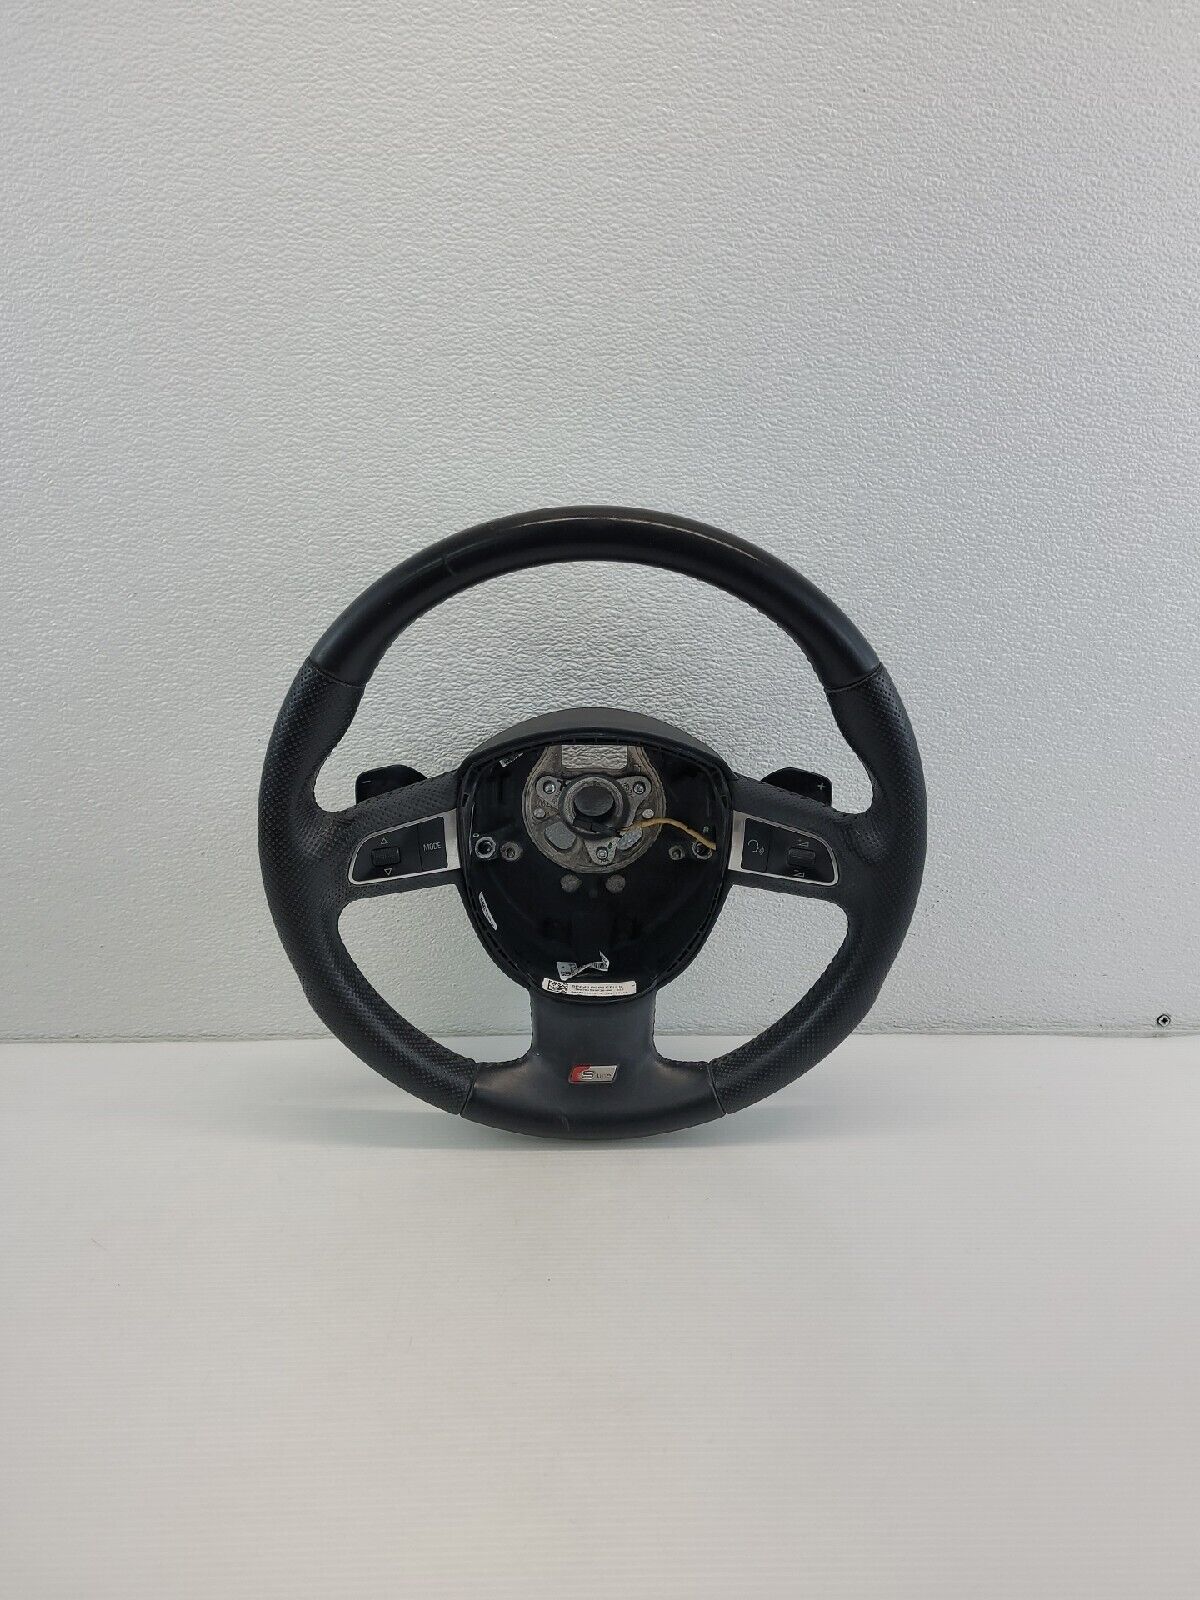 2009 - 2012 AUDI A3 S LINE STEERING WHEEL LEATHER WITH PADDLES 8P0419091EB OEM